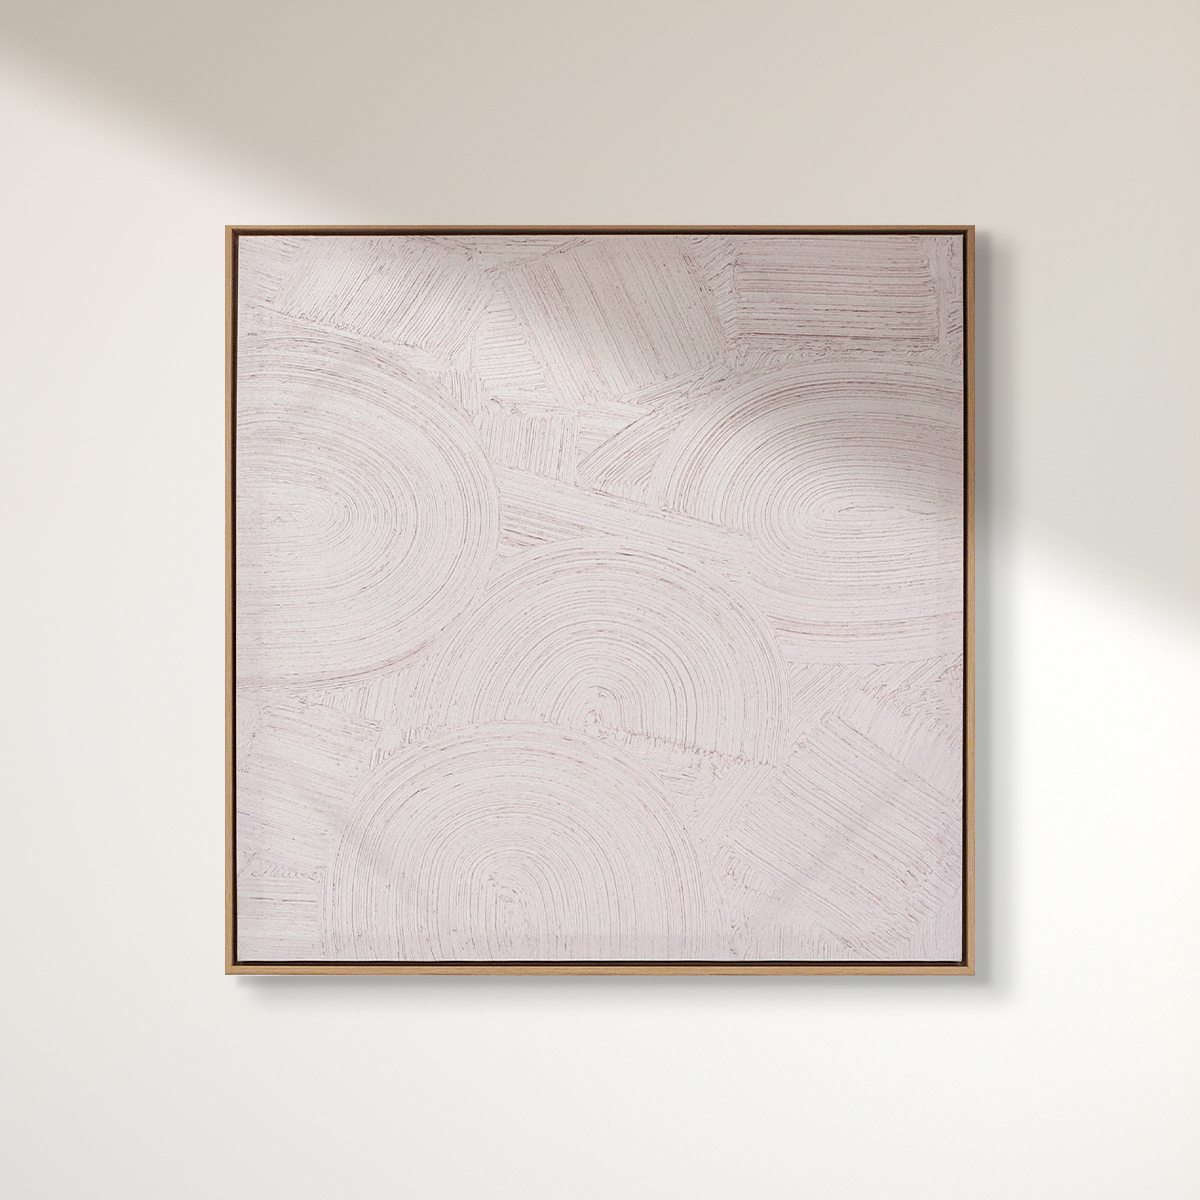 Abstract textured wall art affordable oil painting unframed white zen square on wooden frame